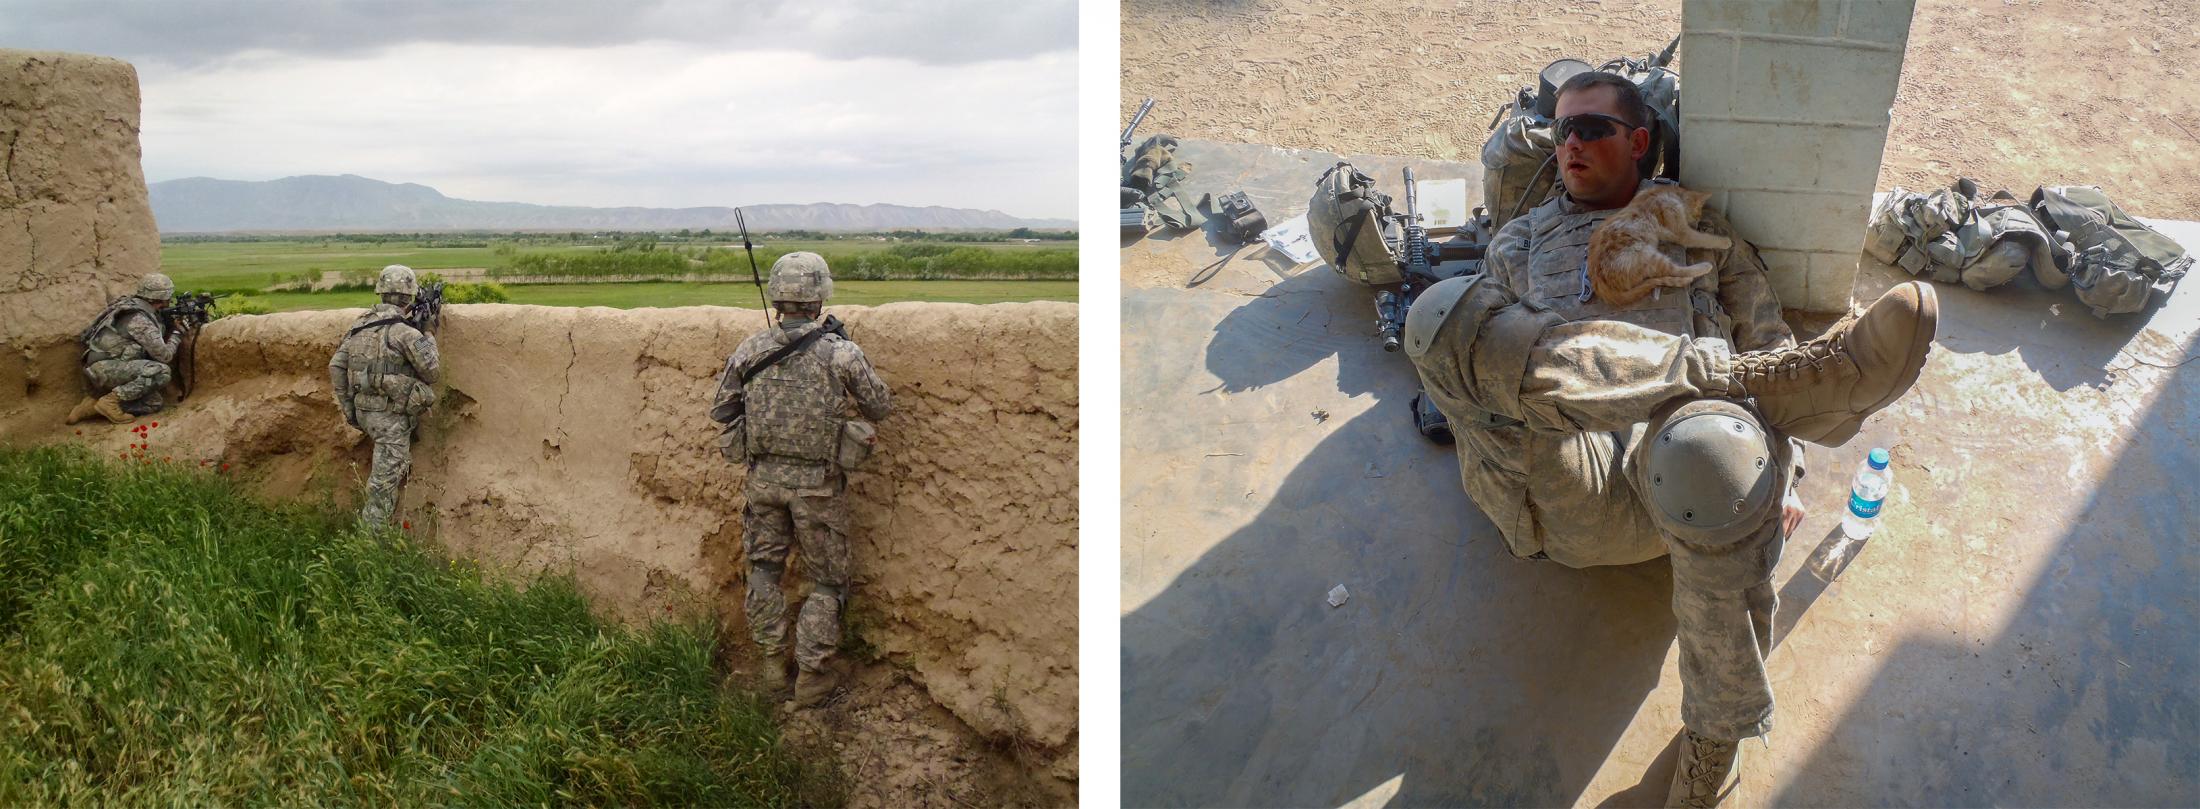 Happy Anniversary from Afghanistan - LEFT: Soldiers watch over their unit's movement in...